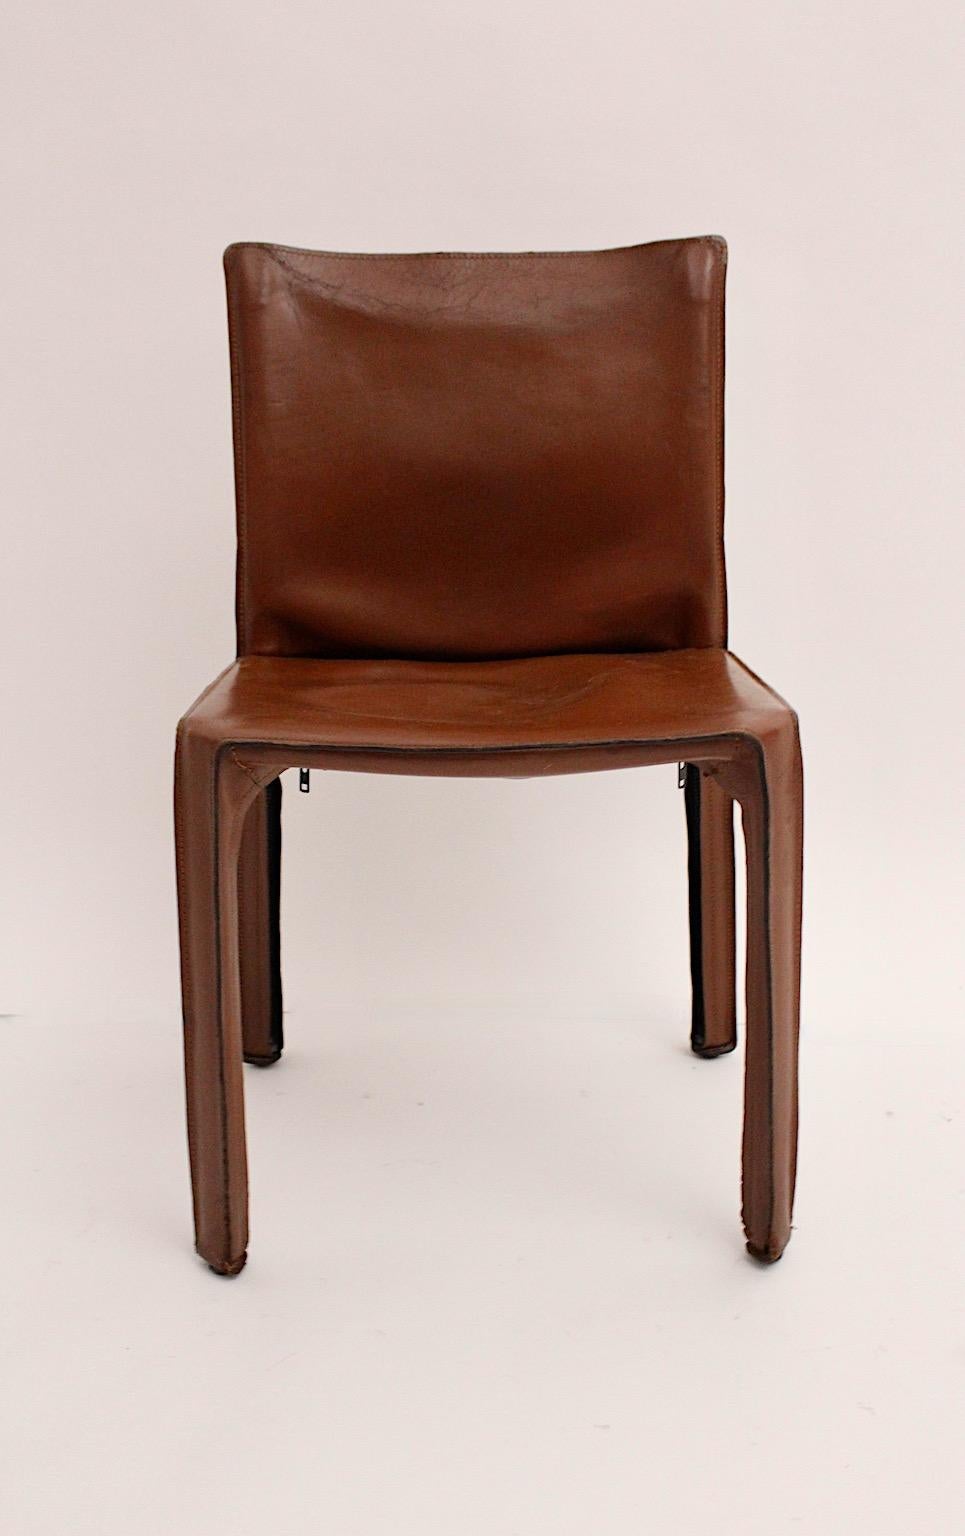 Modern Vintage Five Cognac Brown Leather CAB Dining Chairs Mario Bellini, Italy 1